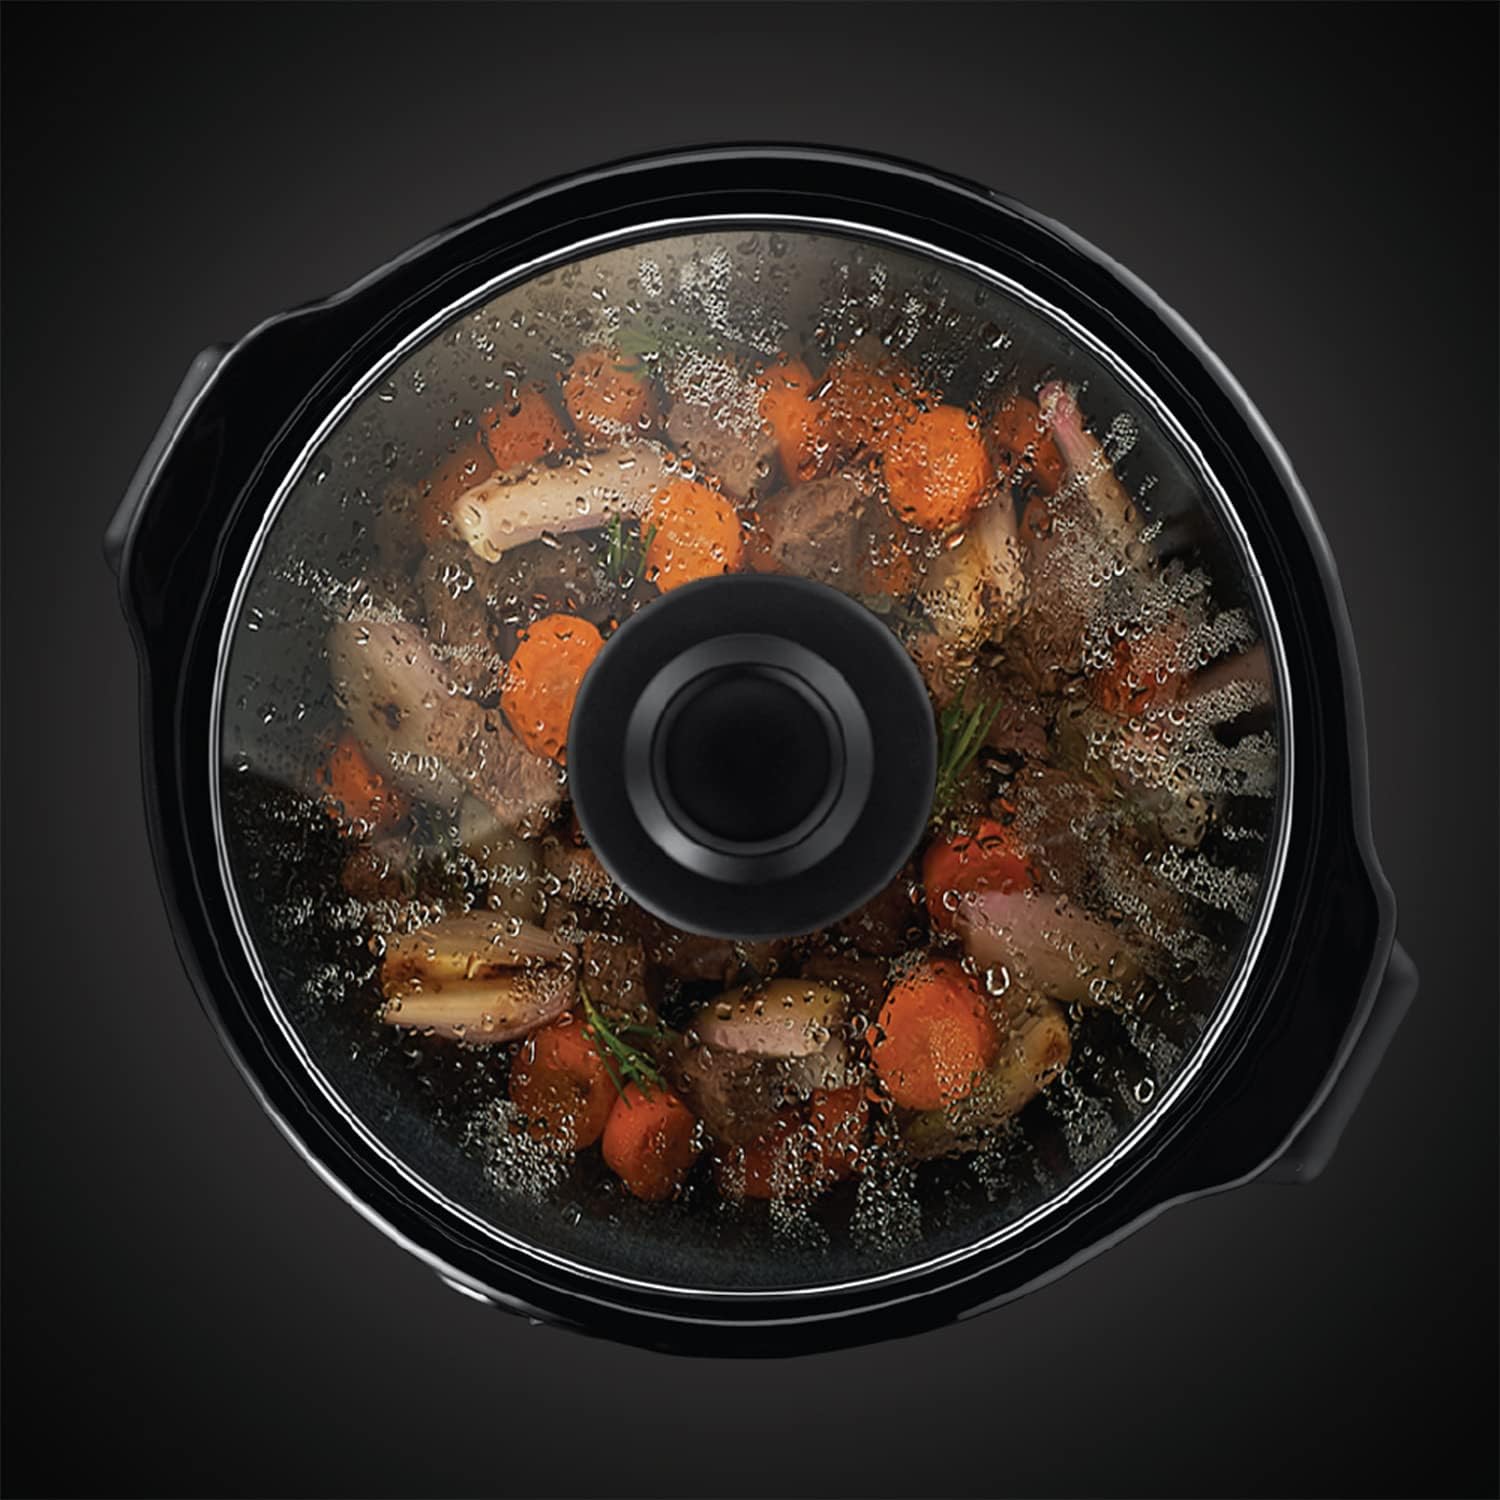 Russell Hobbs Slow Cooker - Top Choice